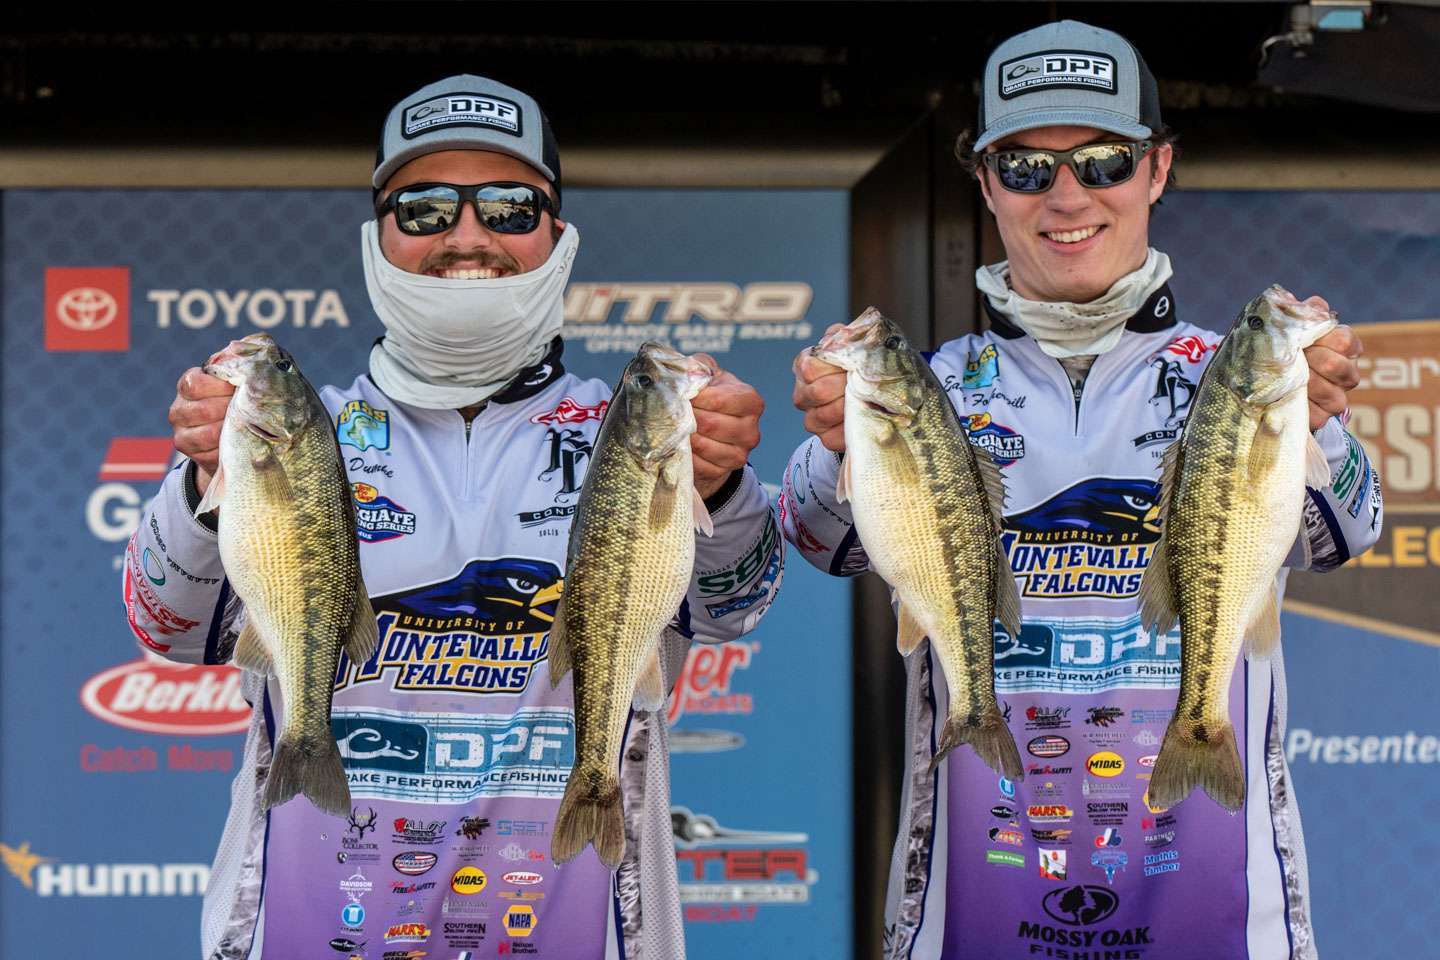 <b>Easton Fothergill - Nick Dumke, University of Montevallo</b><br> Montevallo’s Easton Fothergill and Nick Dumke had a solid season in 2021 with a seventh-place finish at Lake Hartwell as well as a 26th-place finish at Saginaw Bay. Despite going to school in Alabama, both anglers are from Minnesota. This young team is becoming well rounded and has lots of potential. 